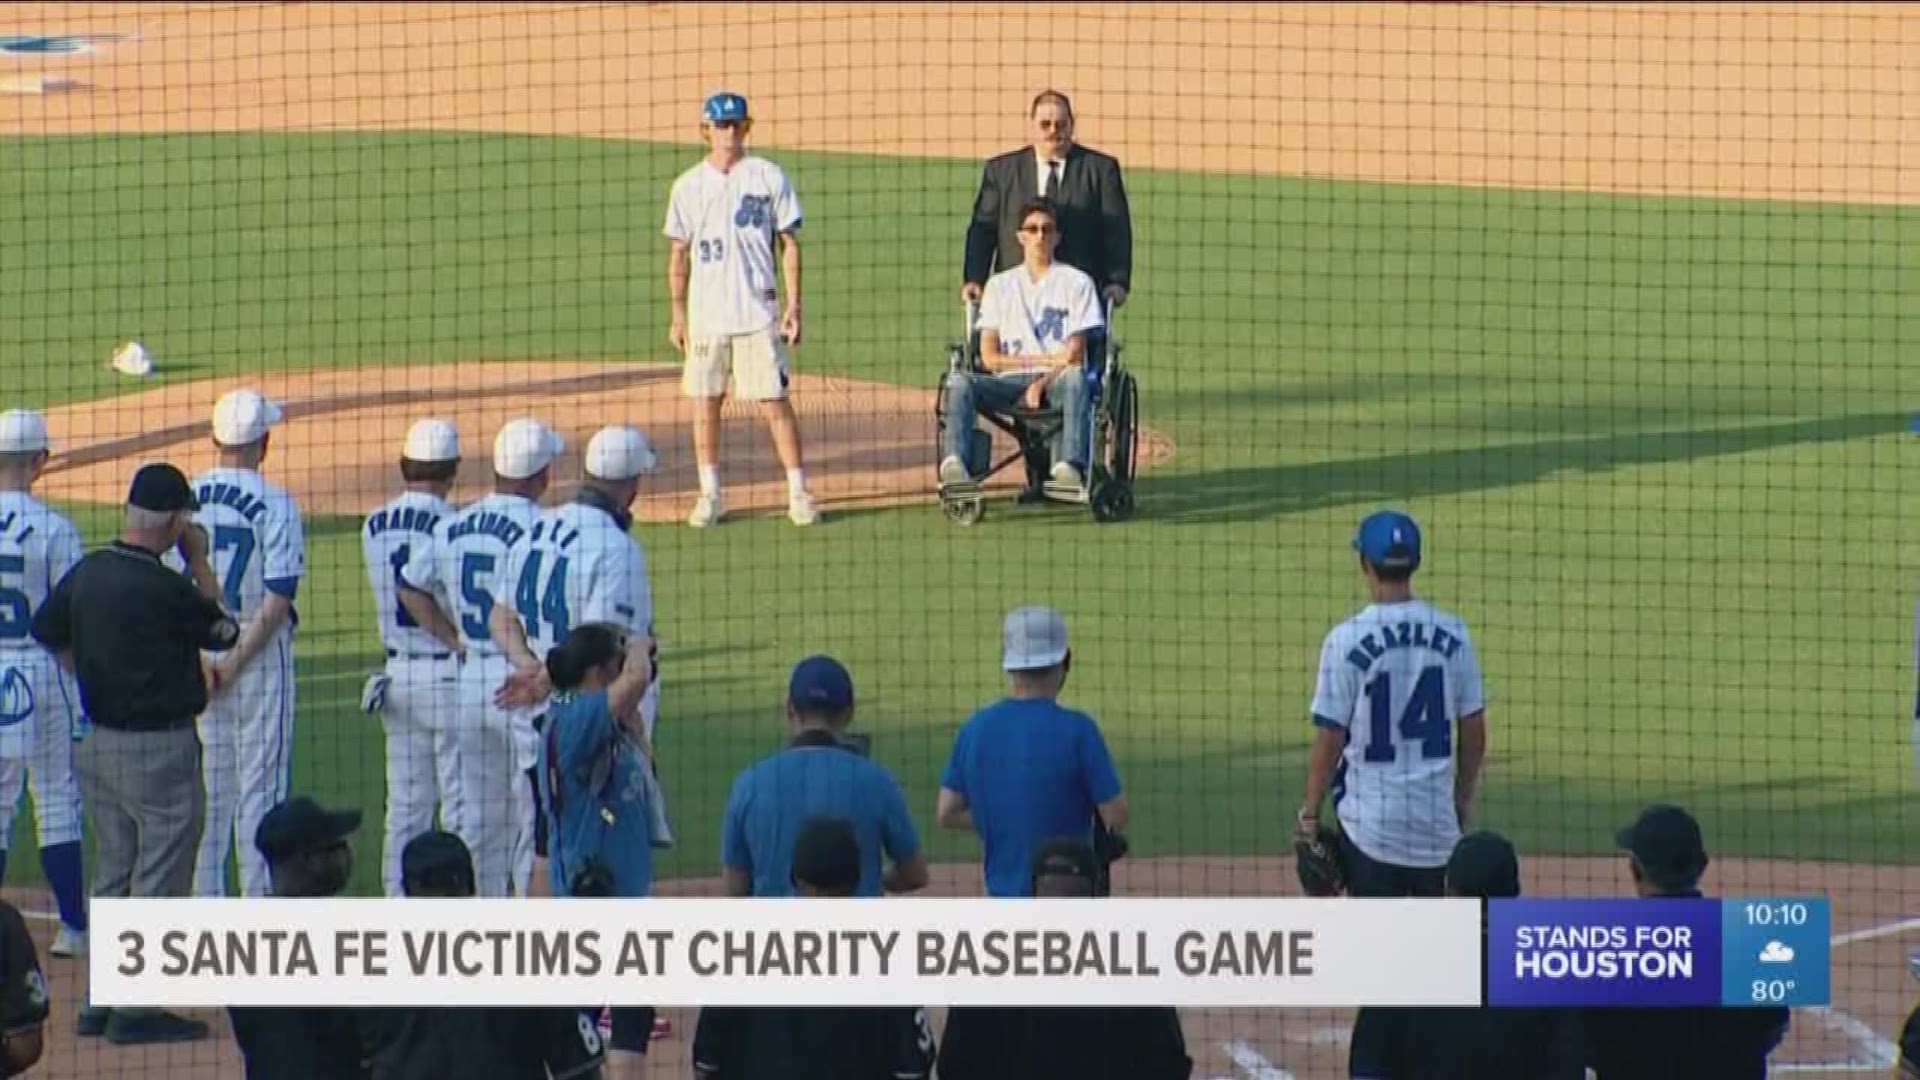 A trio of Santa Fe High School baseball players and shooting survivors were honored at a charity baseball game in Dallas Friday.